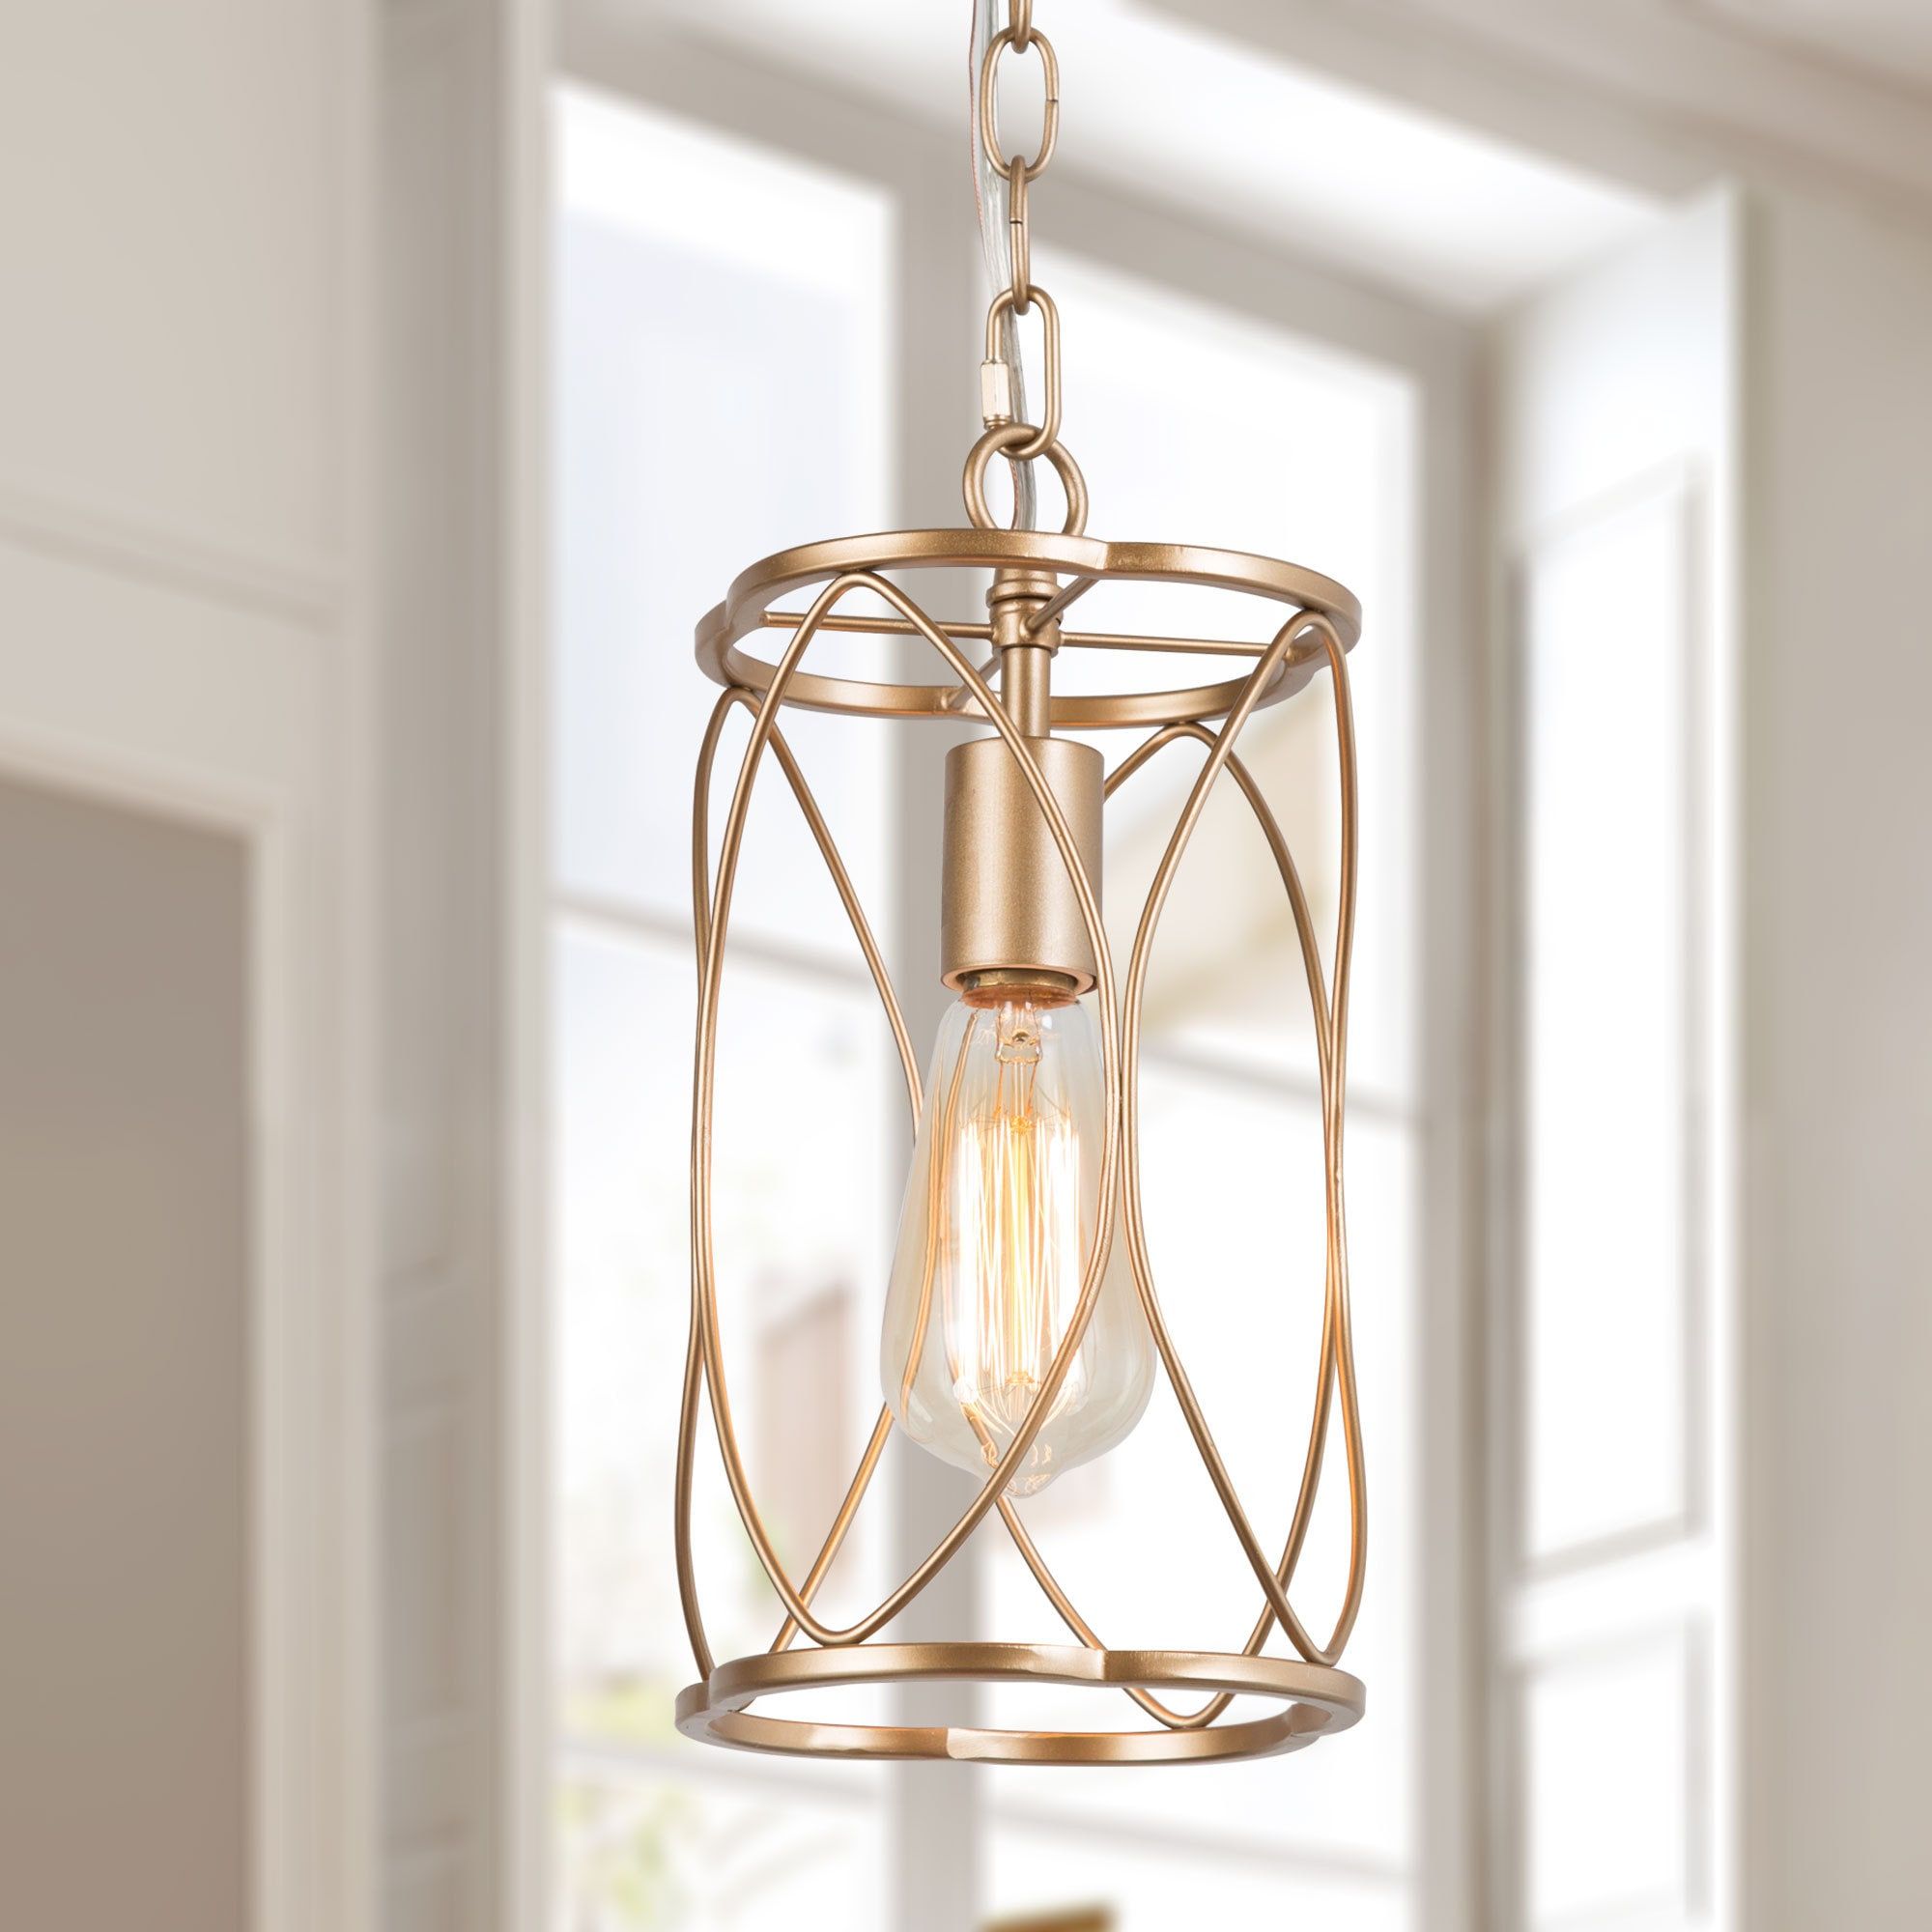 Lnc Trend Matte Champagne Gold Modern/contemporary Lantern Led Mini Pendant  Light At Lowes Inside Brushed Champagne Lantern Chandeliers (View 1 of 15)